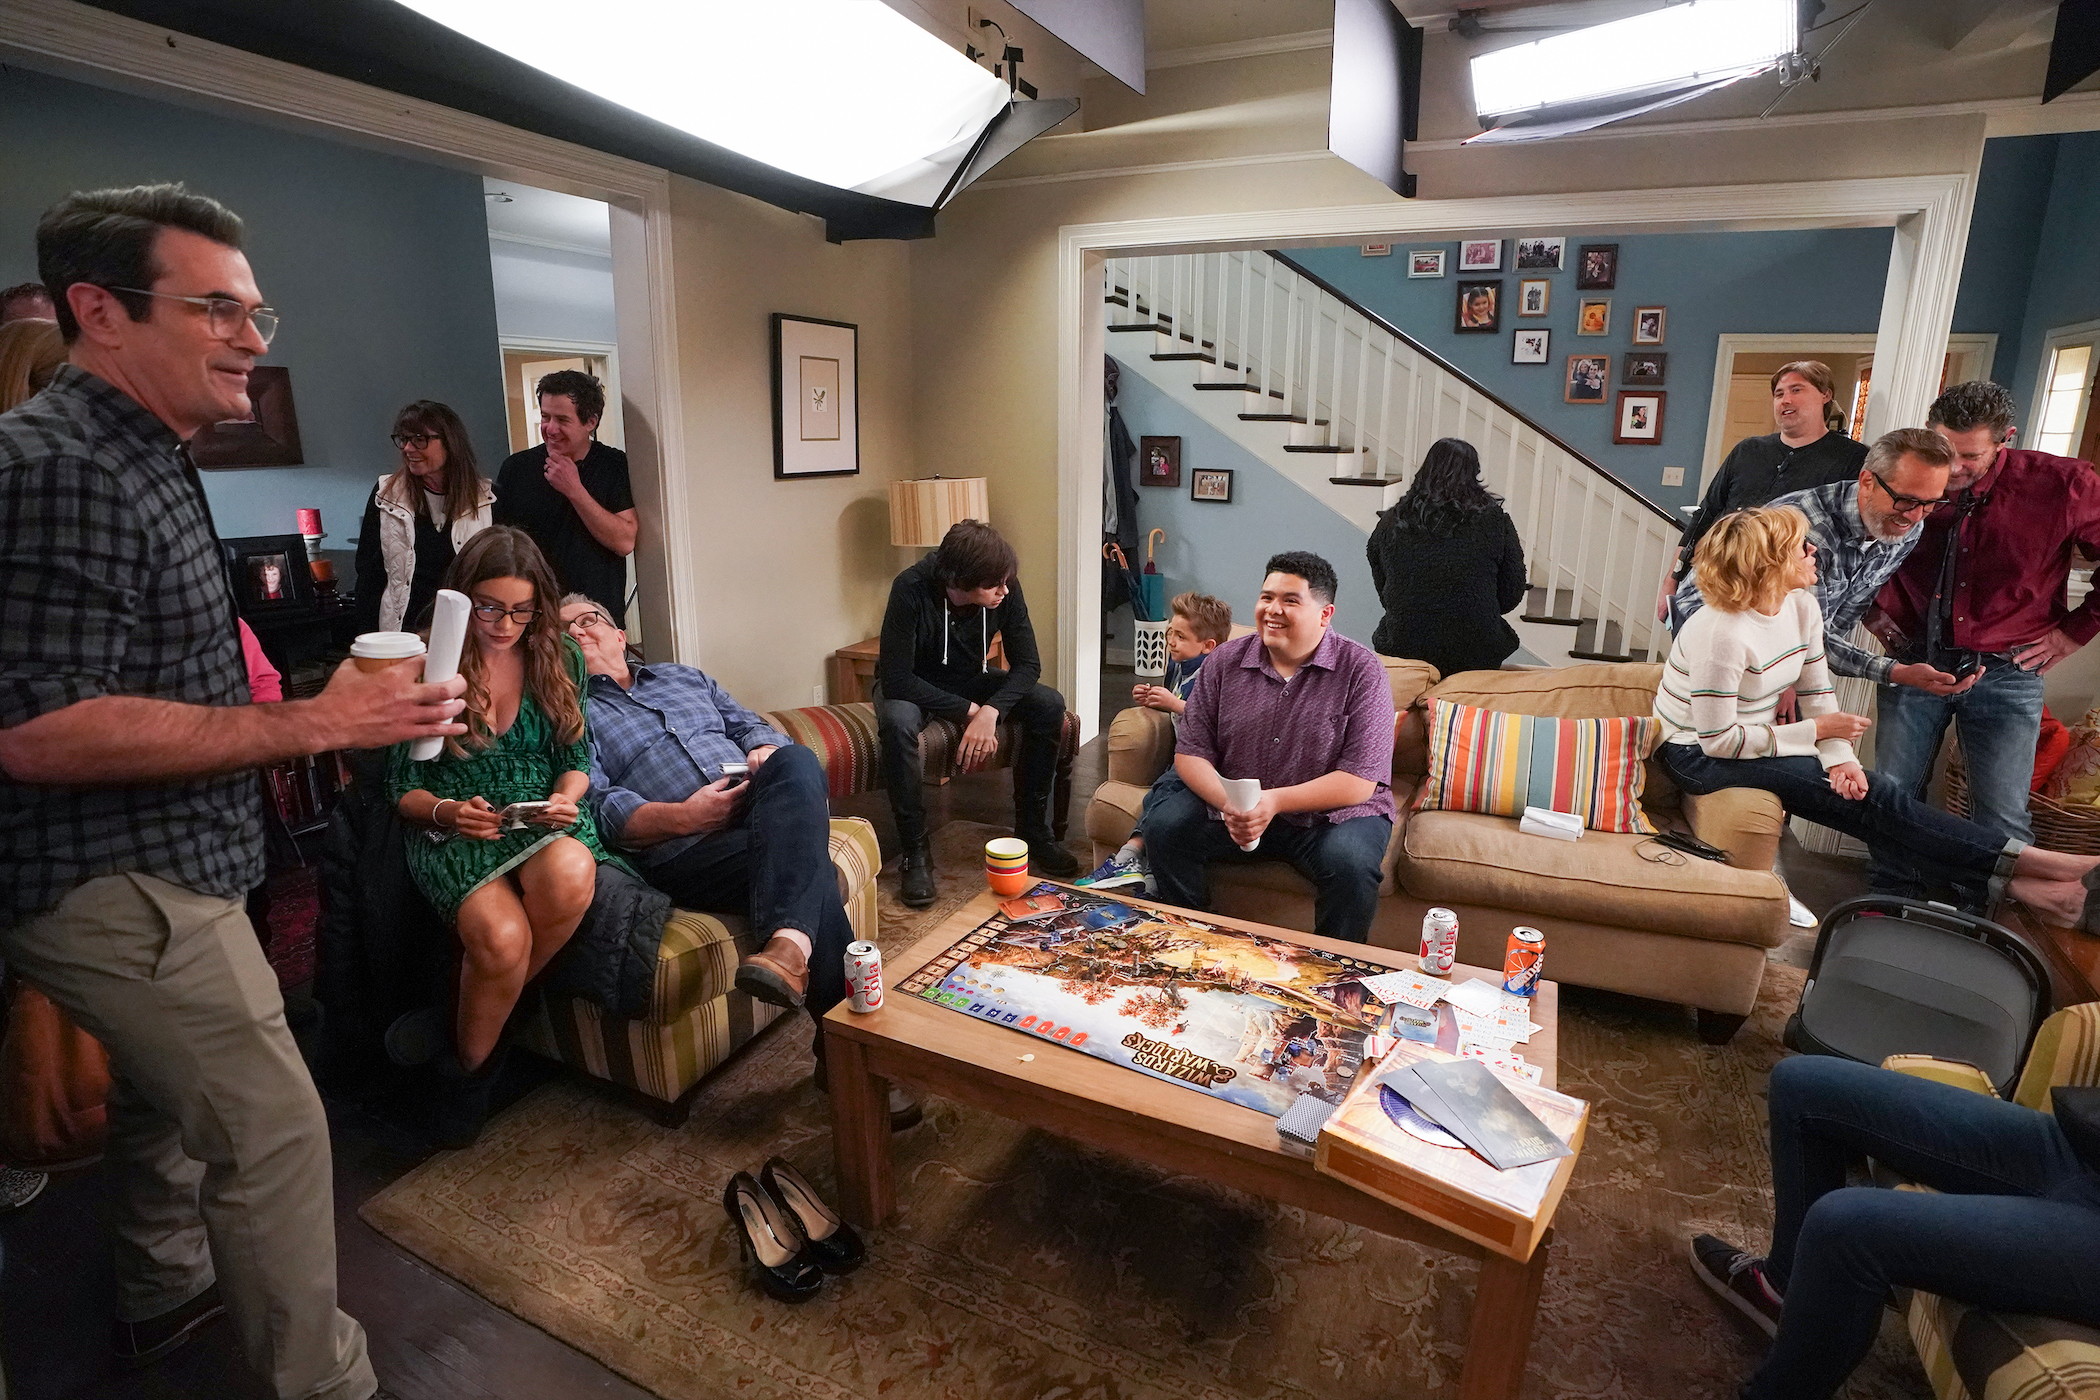 ABC's 'Modern Family' cast sitting in a living room to film the finale